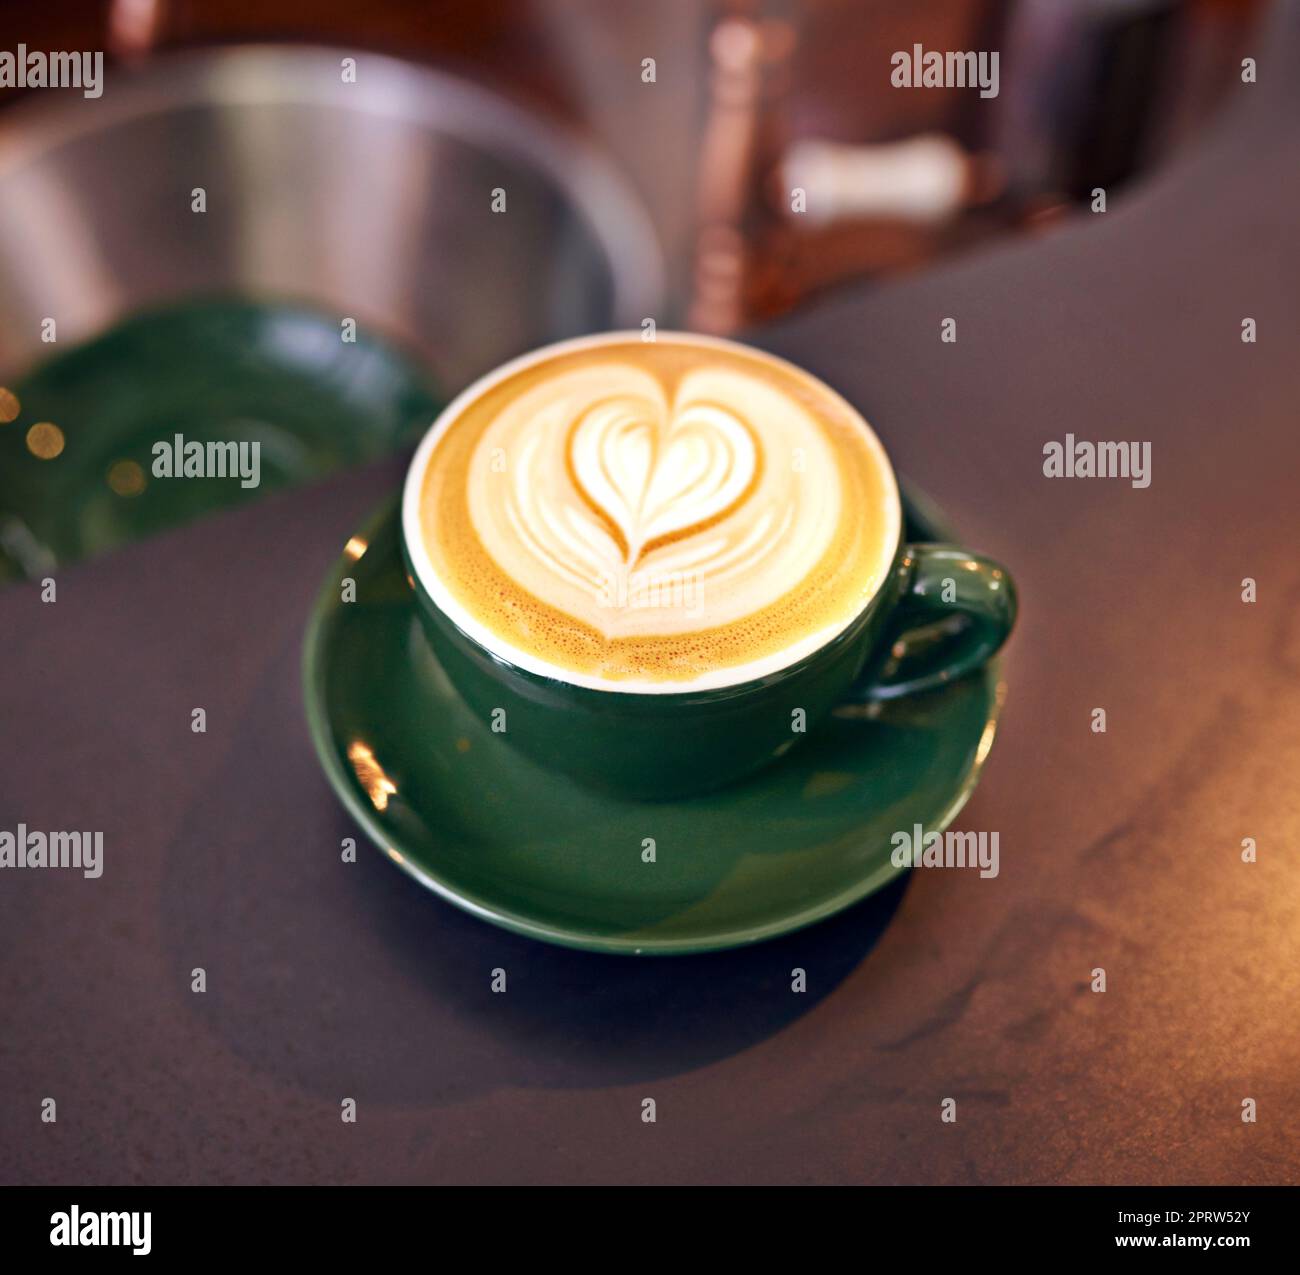 Coffee culture. High angle shot of a lovingly prepared cup of cappuccino sitting on a cafe table. Stock Photo